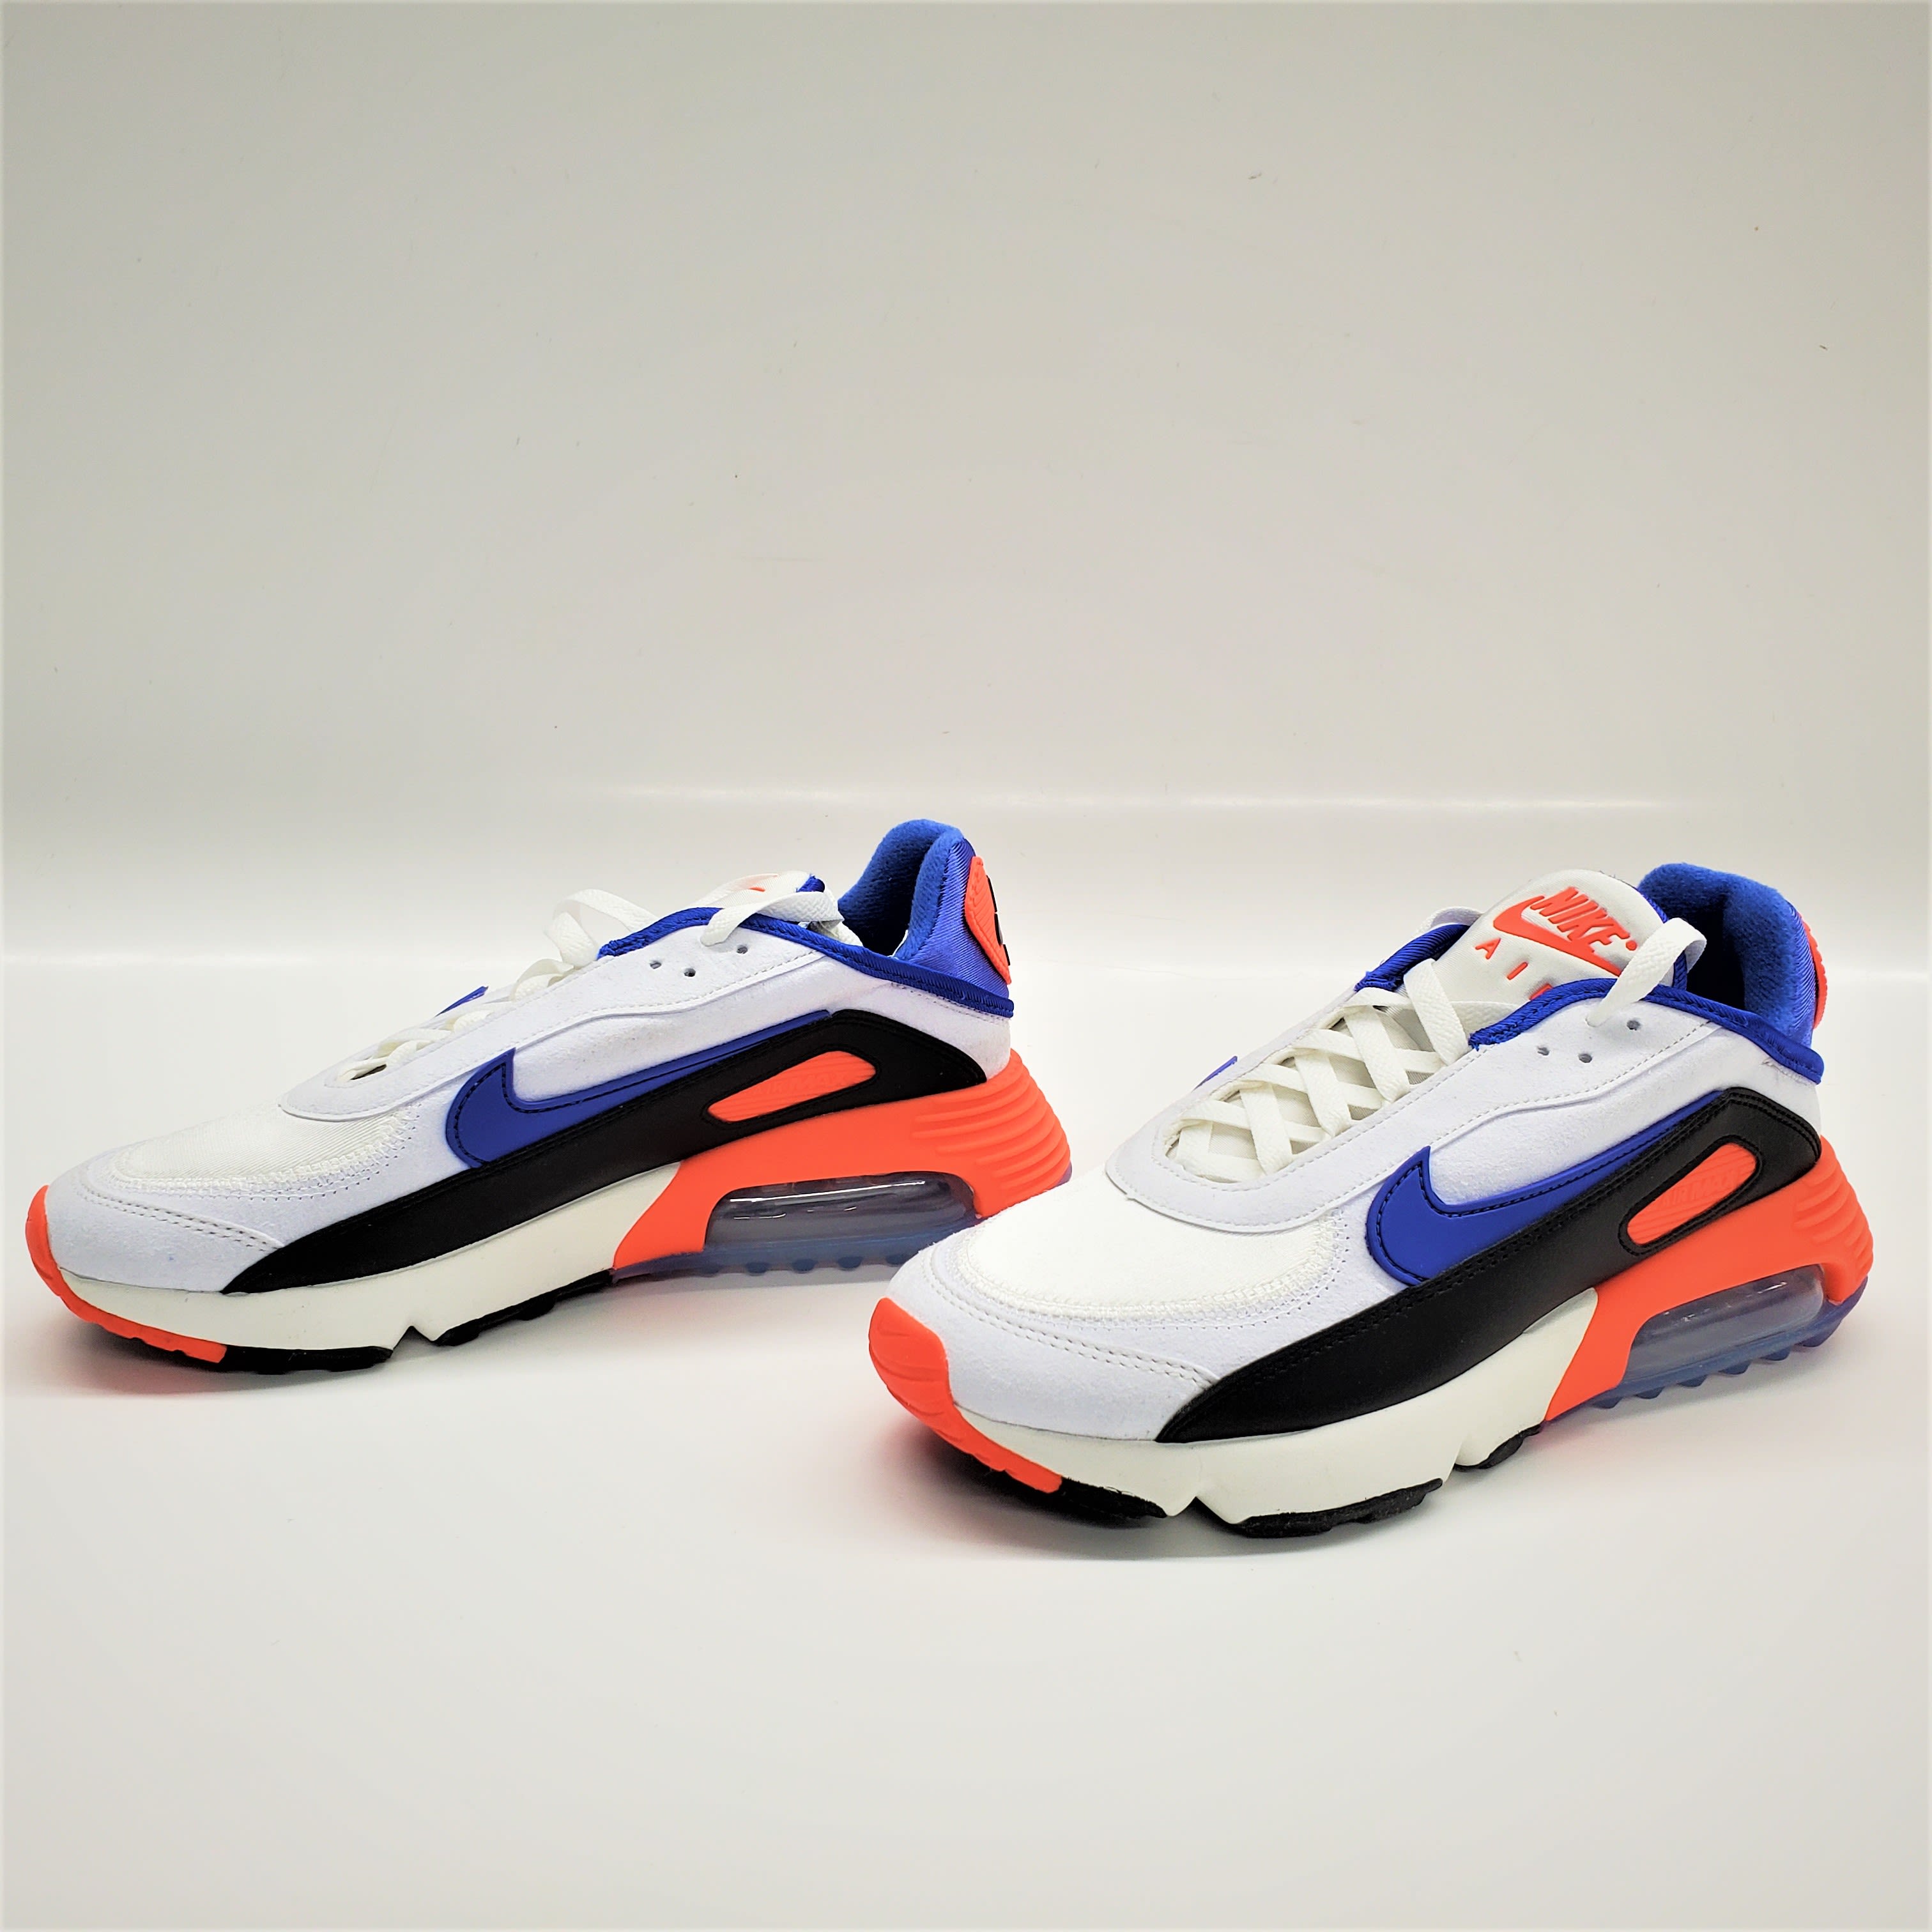 Nike Air Max 2090 EOI DA9357-100 'Evolution of Icons' Men's Running Casual  Shoes